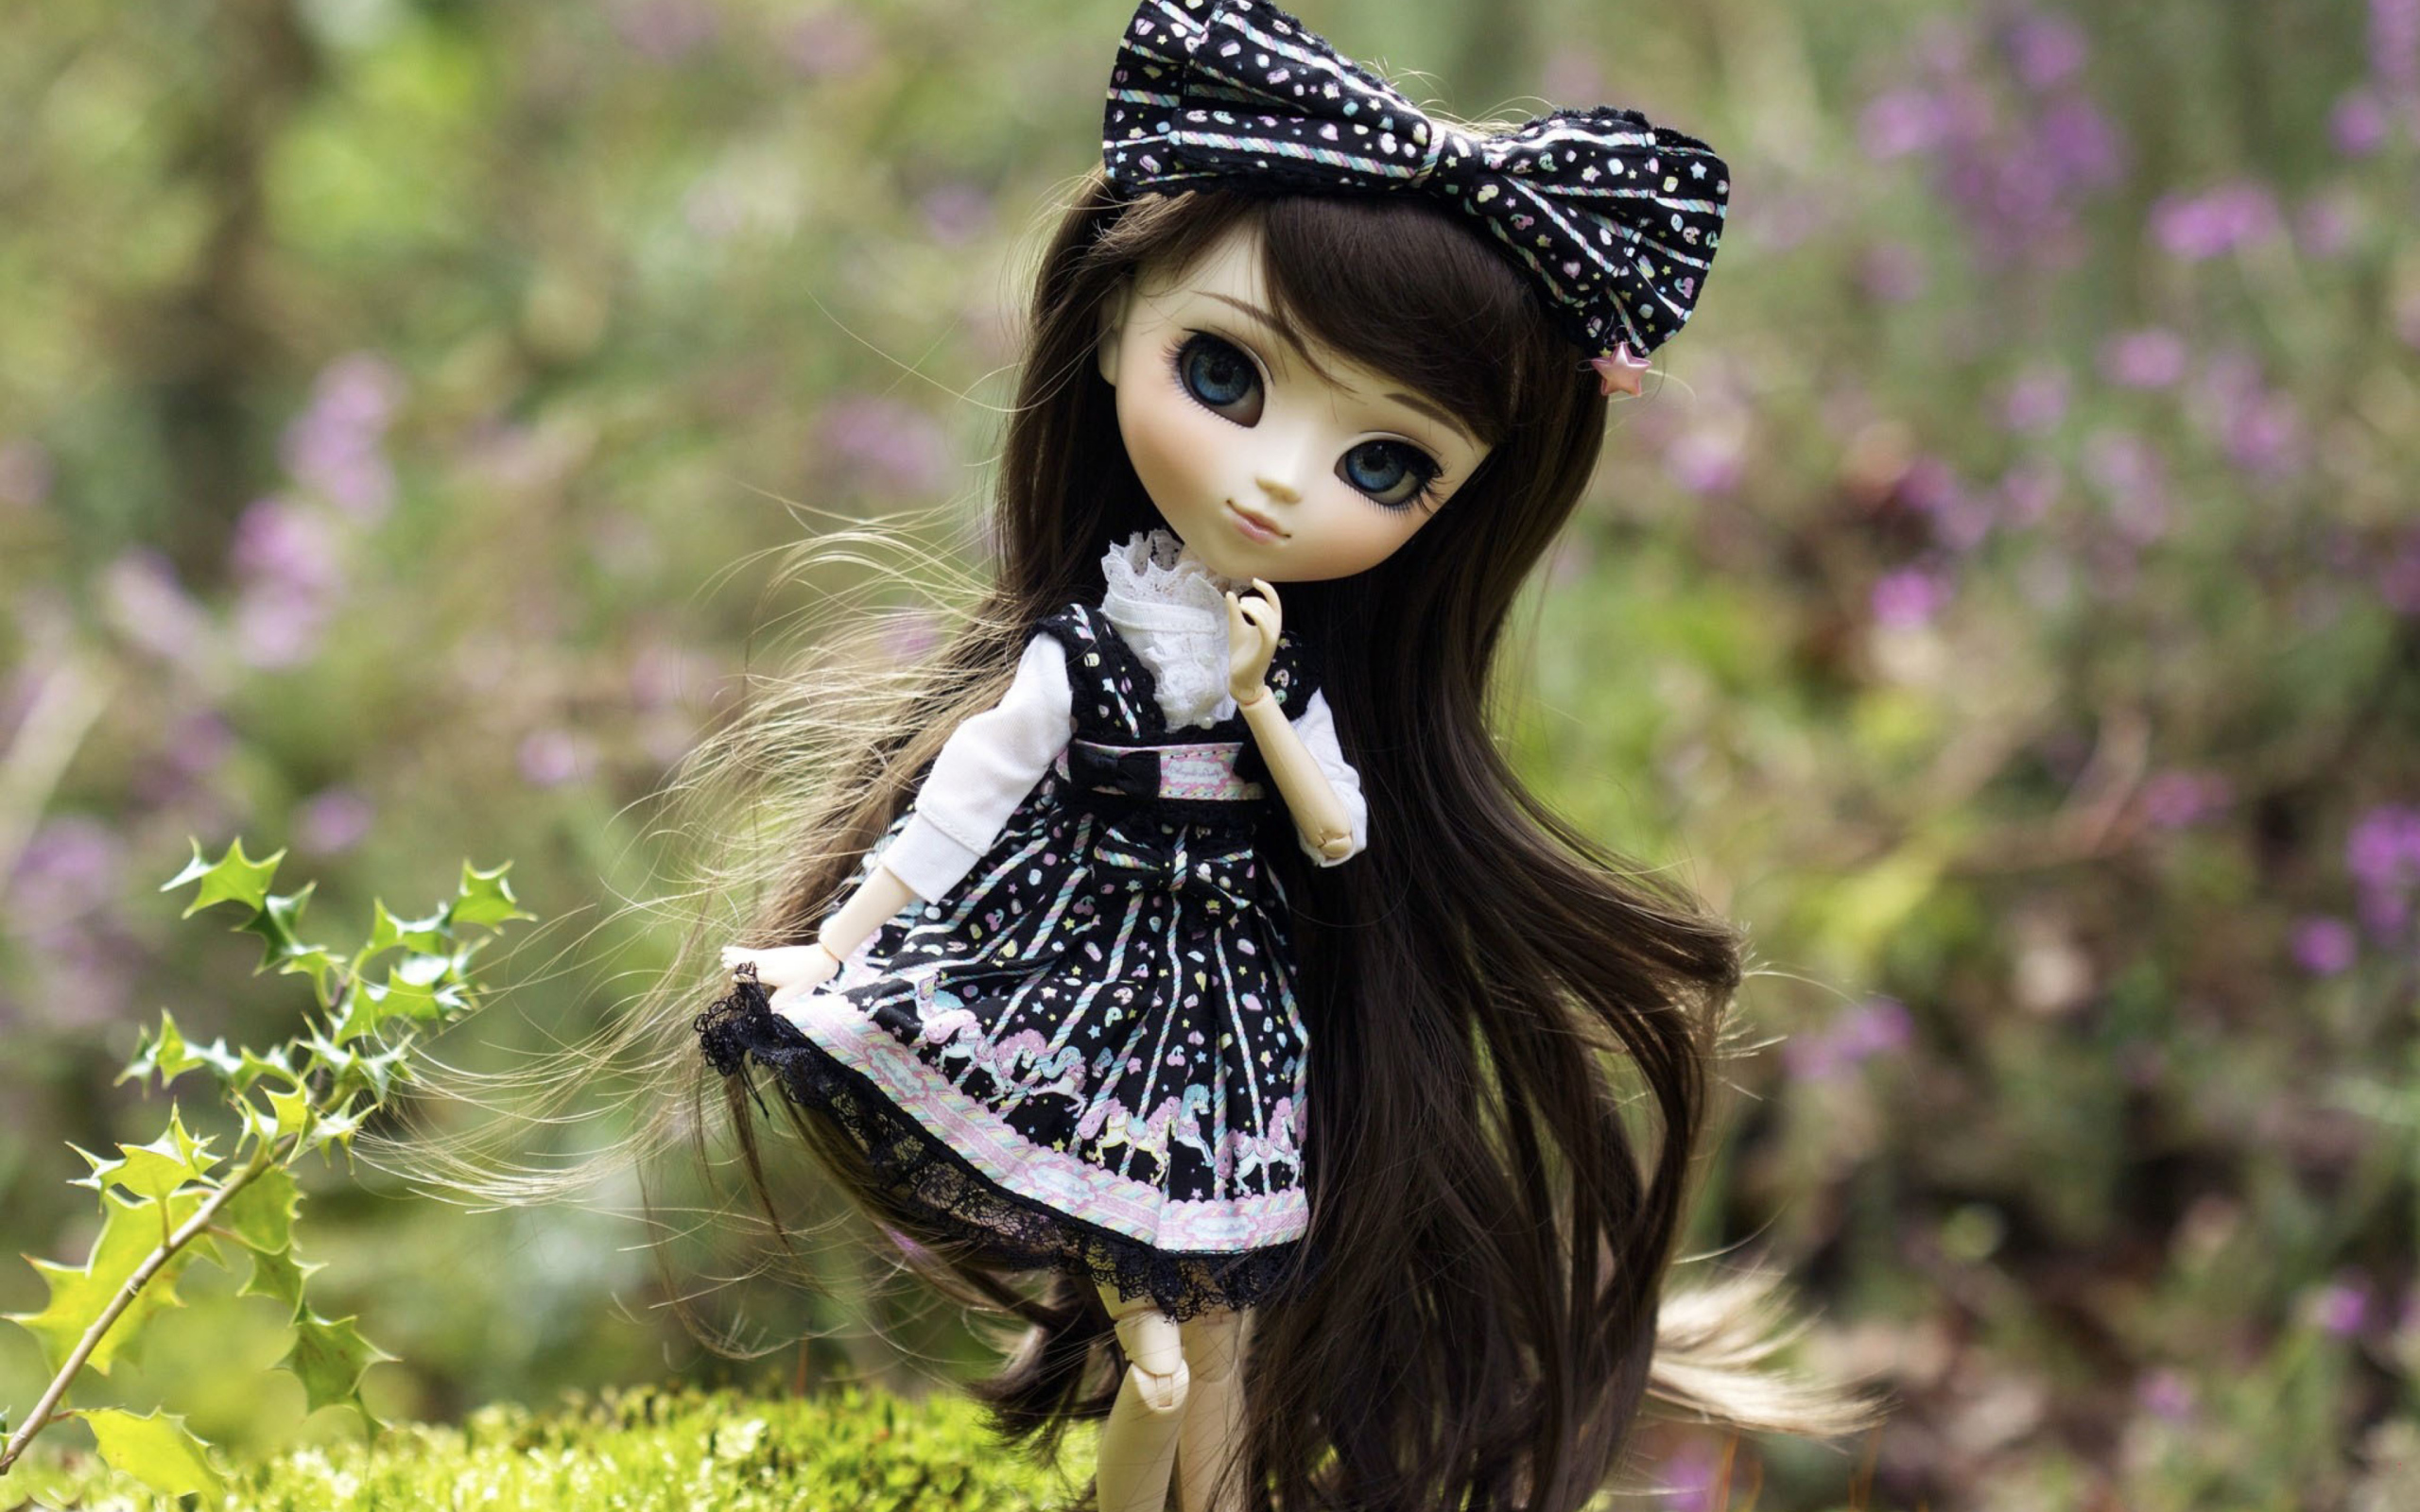 Cute Doll With Dark Hair And Black Bow wallpaper 2560x1600